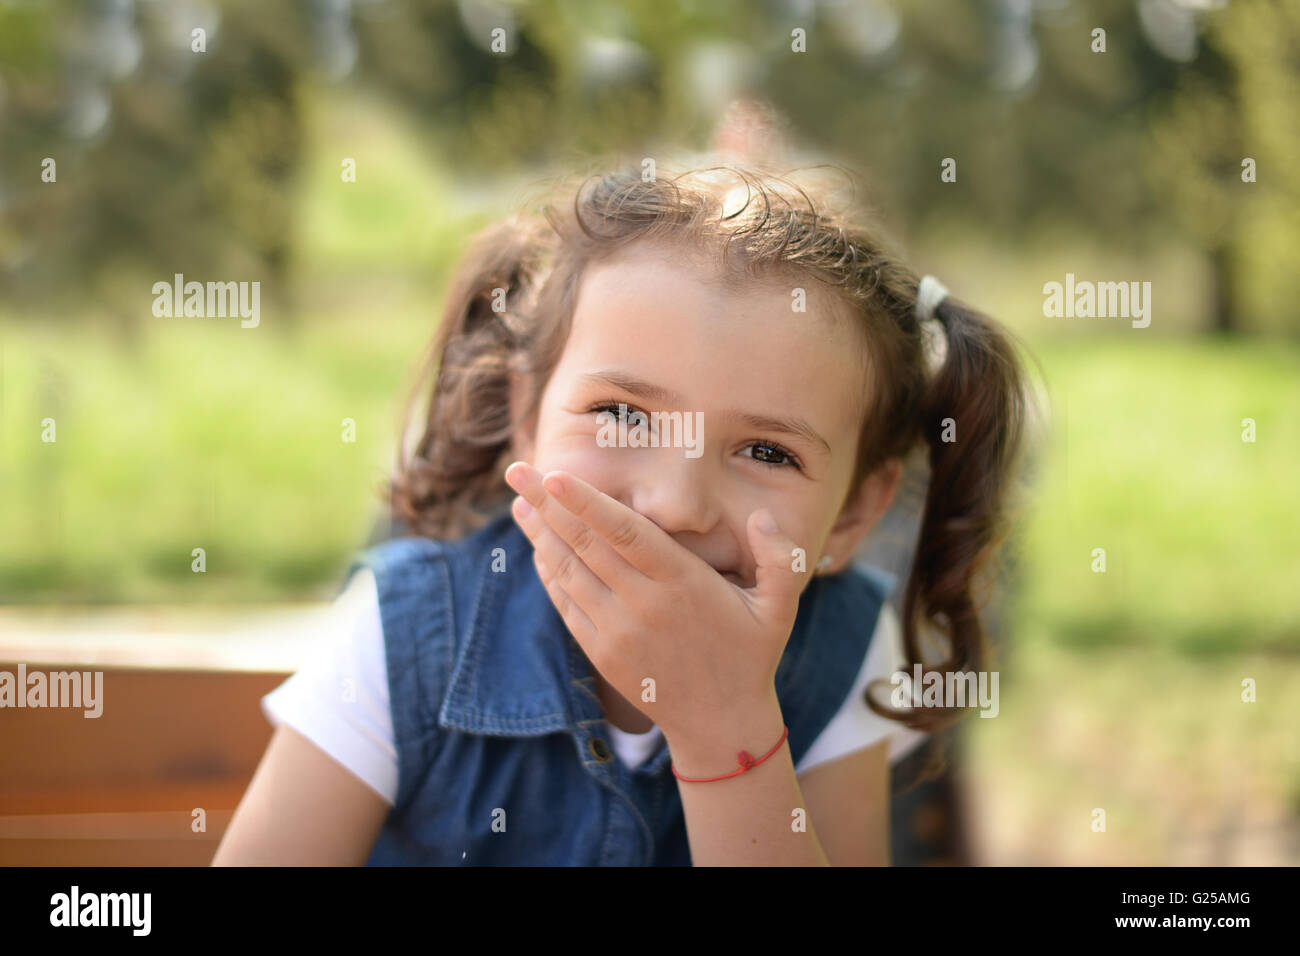 Portrait of Girl holding hand in front of her mouth laughing Stock Photo